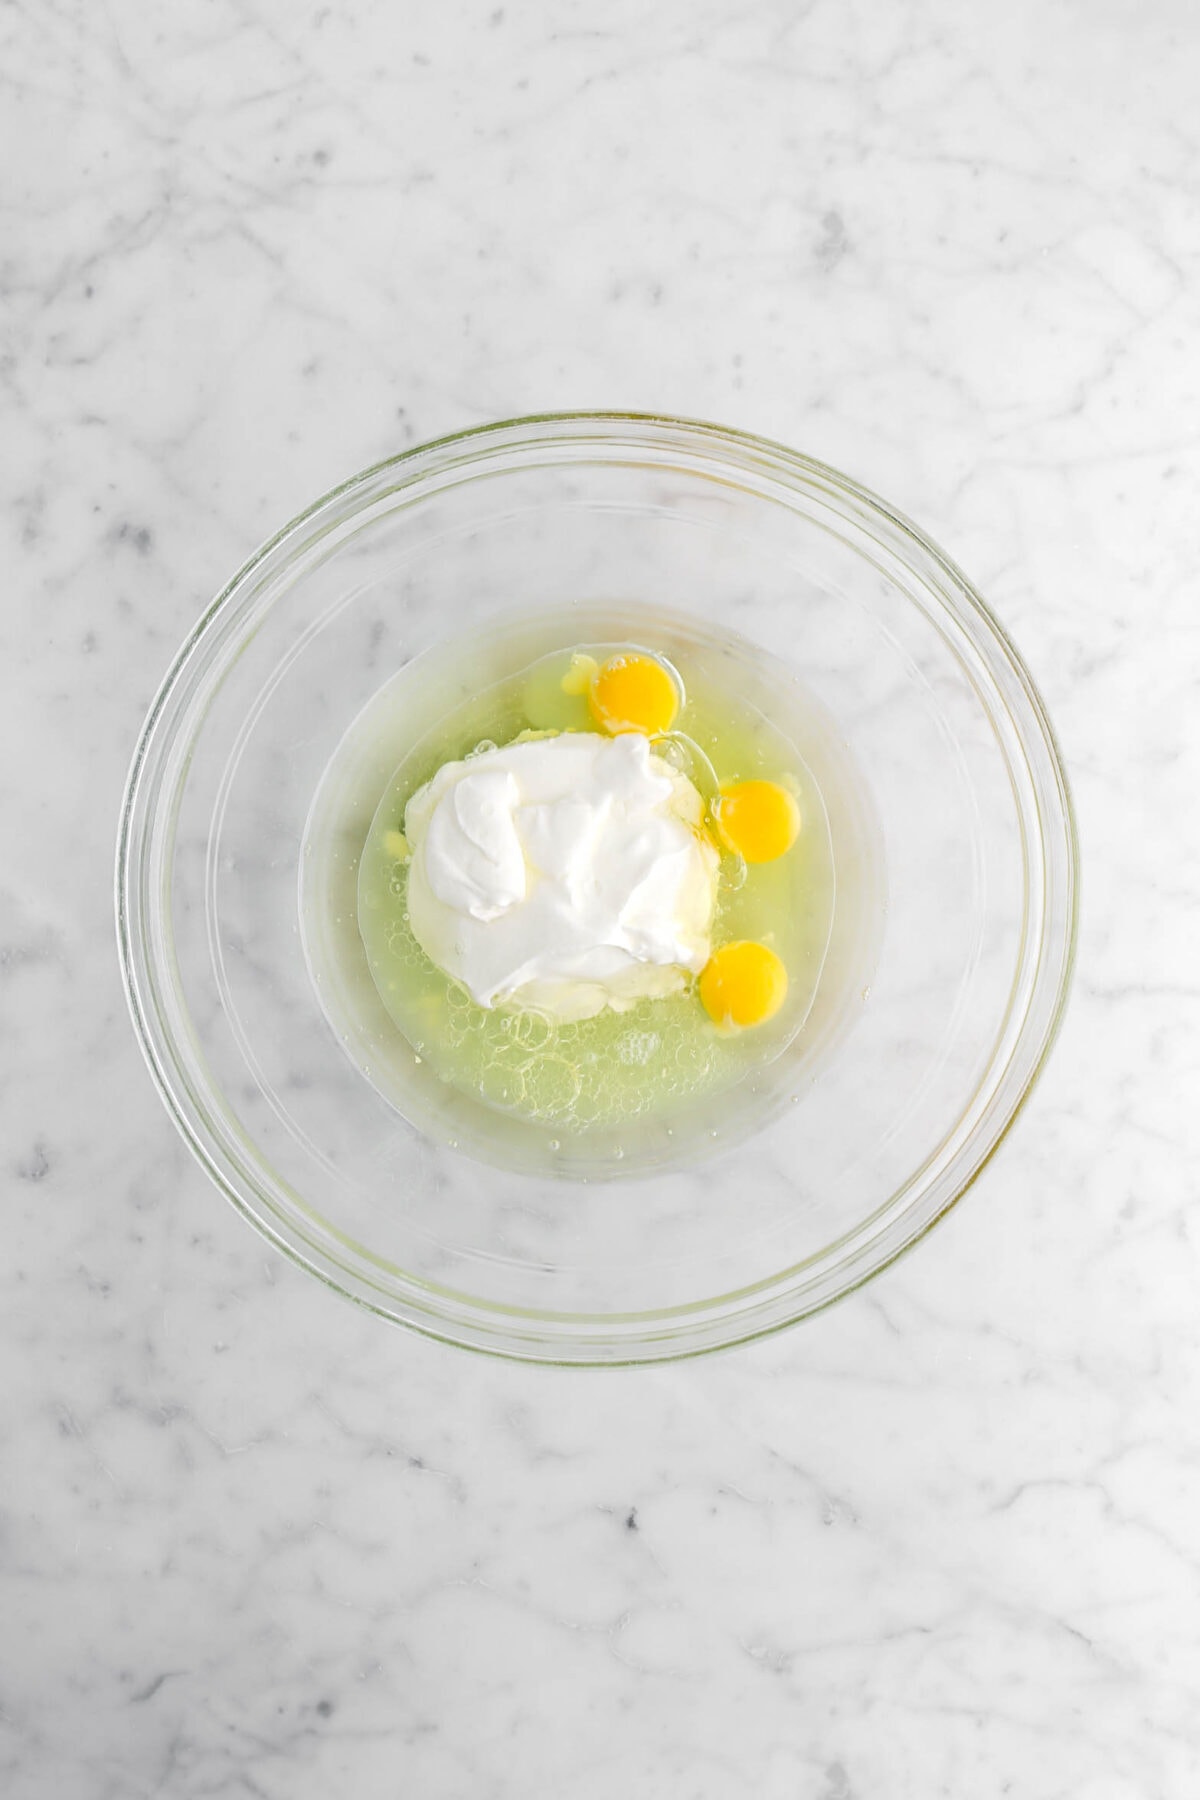 oil, eggs, lime juice, and sour cream in glass bowl.